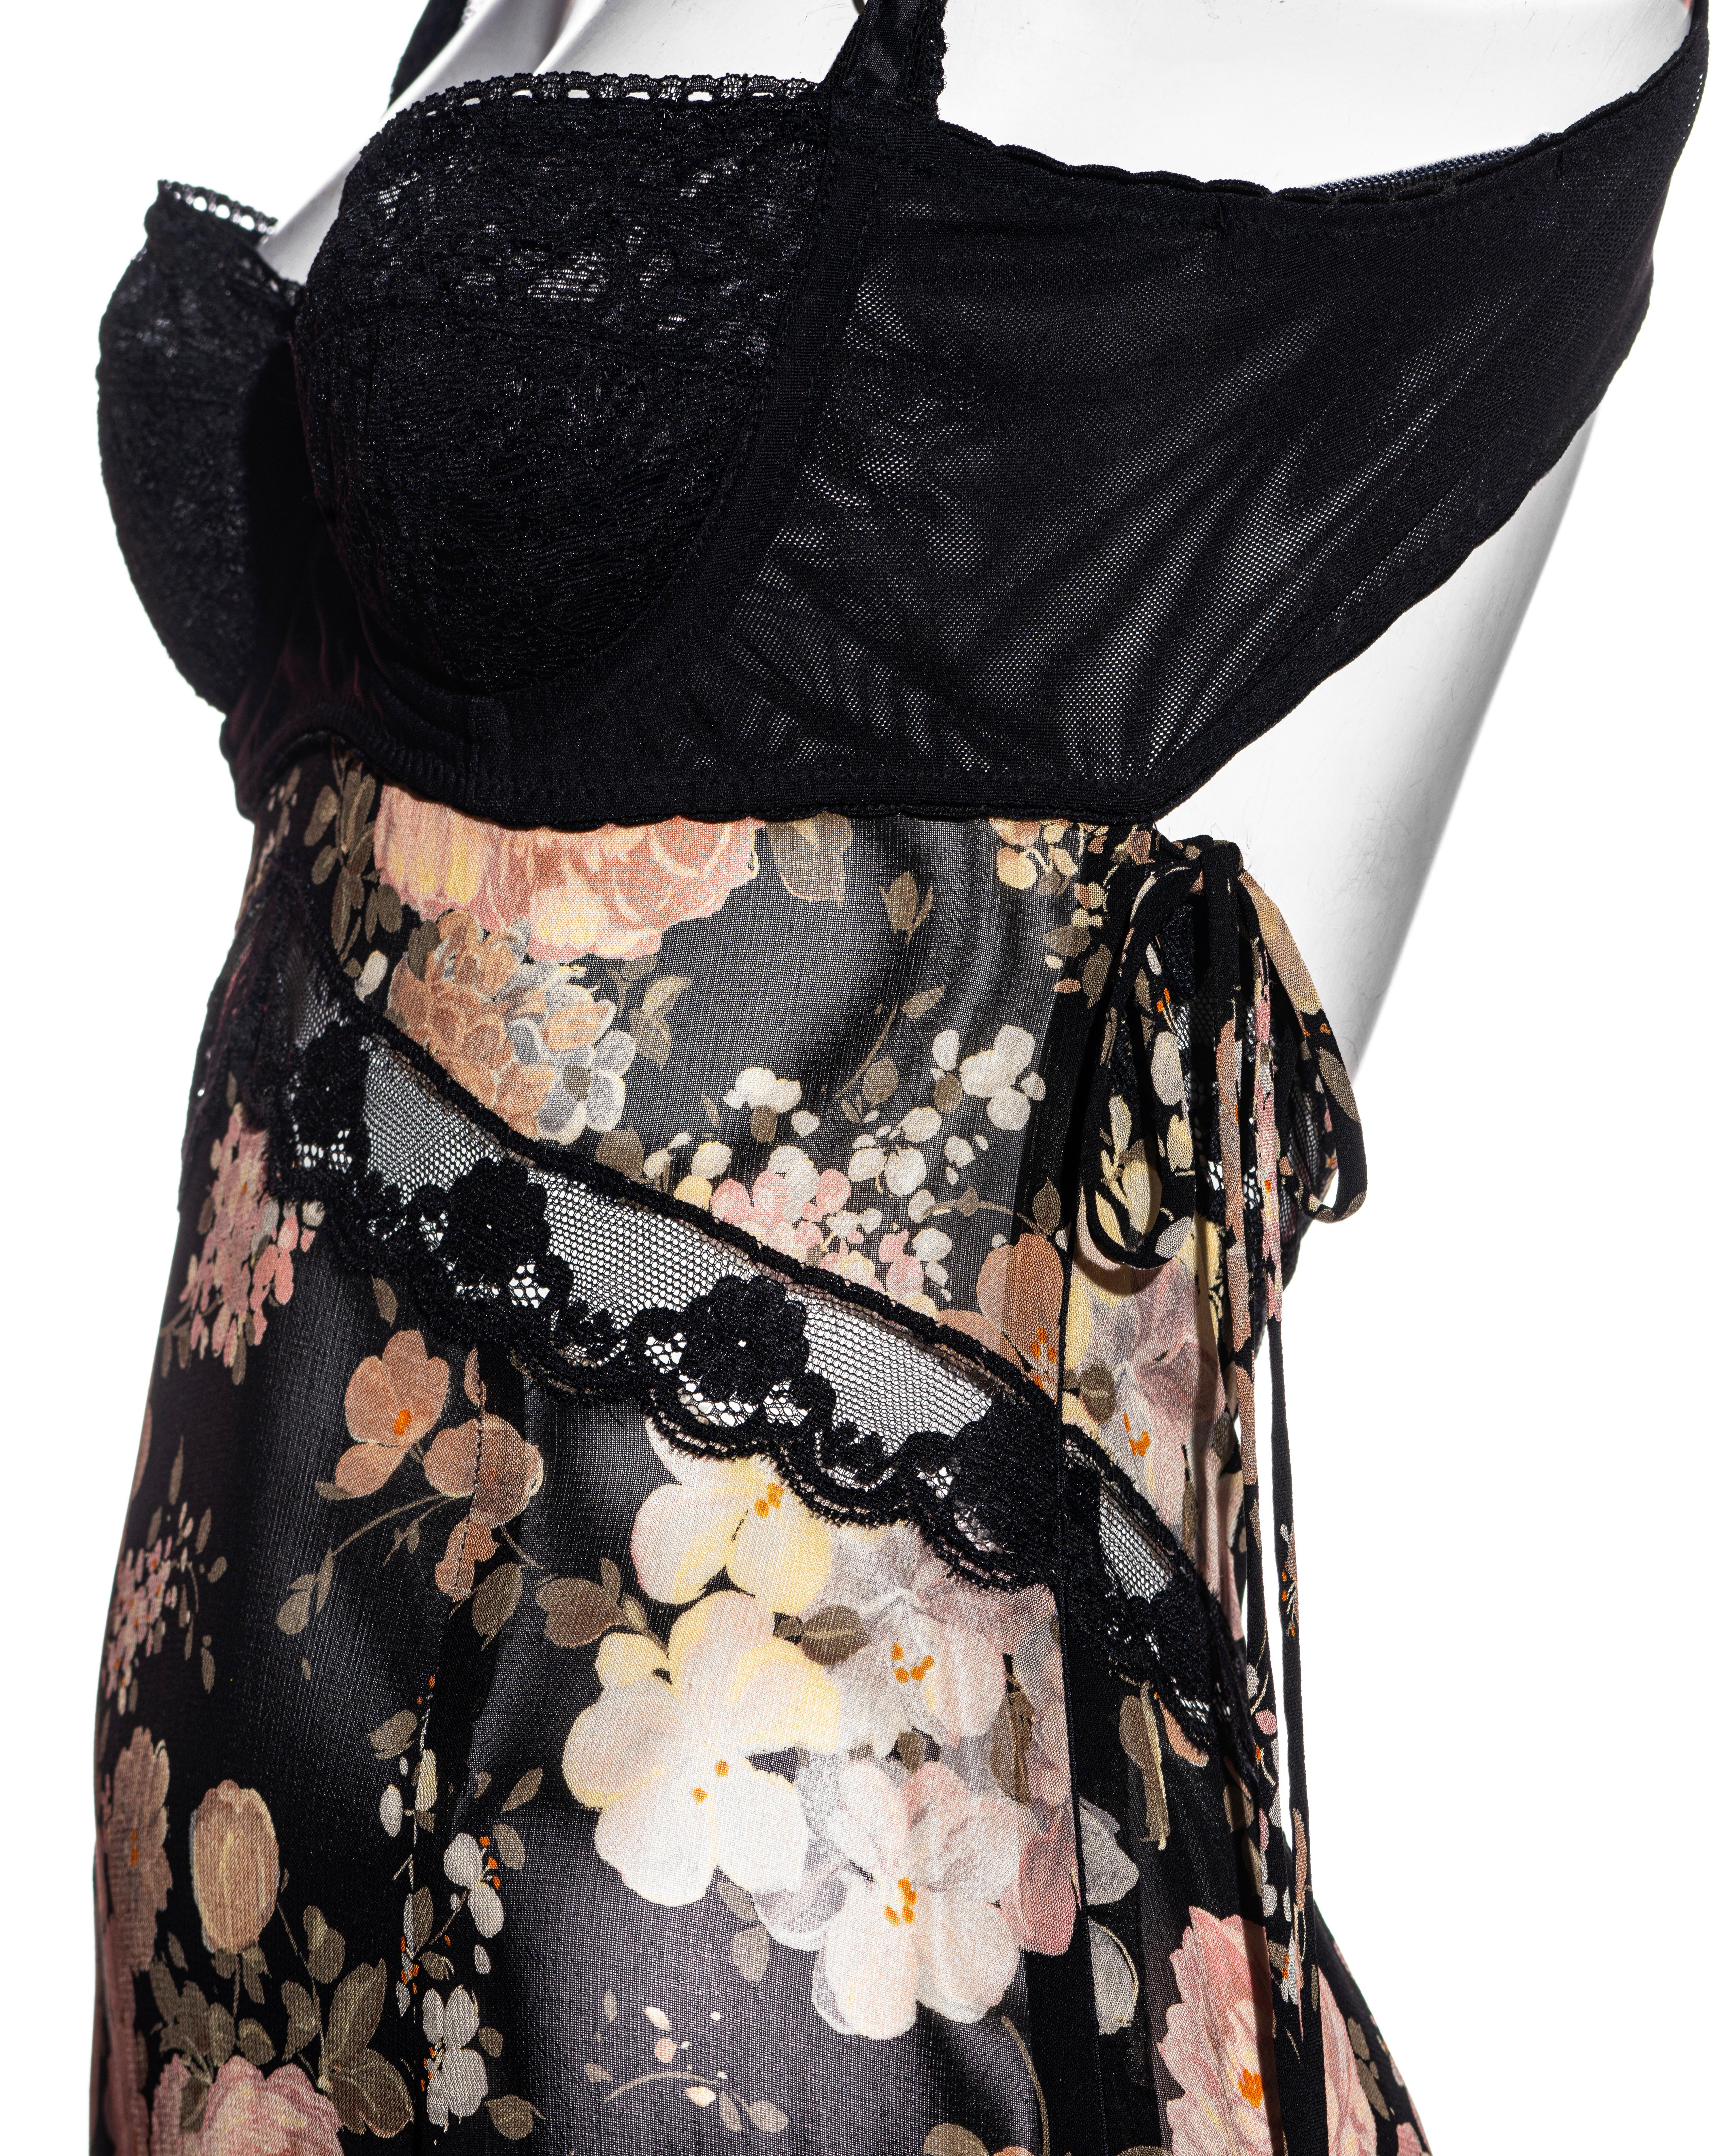 Dolce & Gabbana floral chiffon and lace evening slip dress, ss 1997 In Good Condition For Sale In London, GB